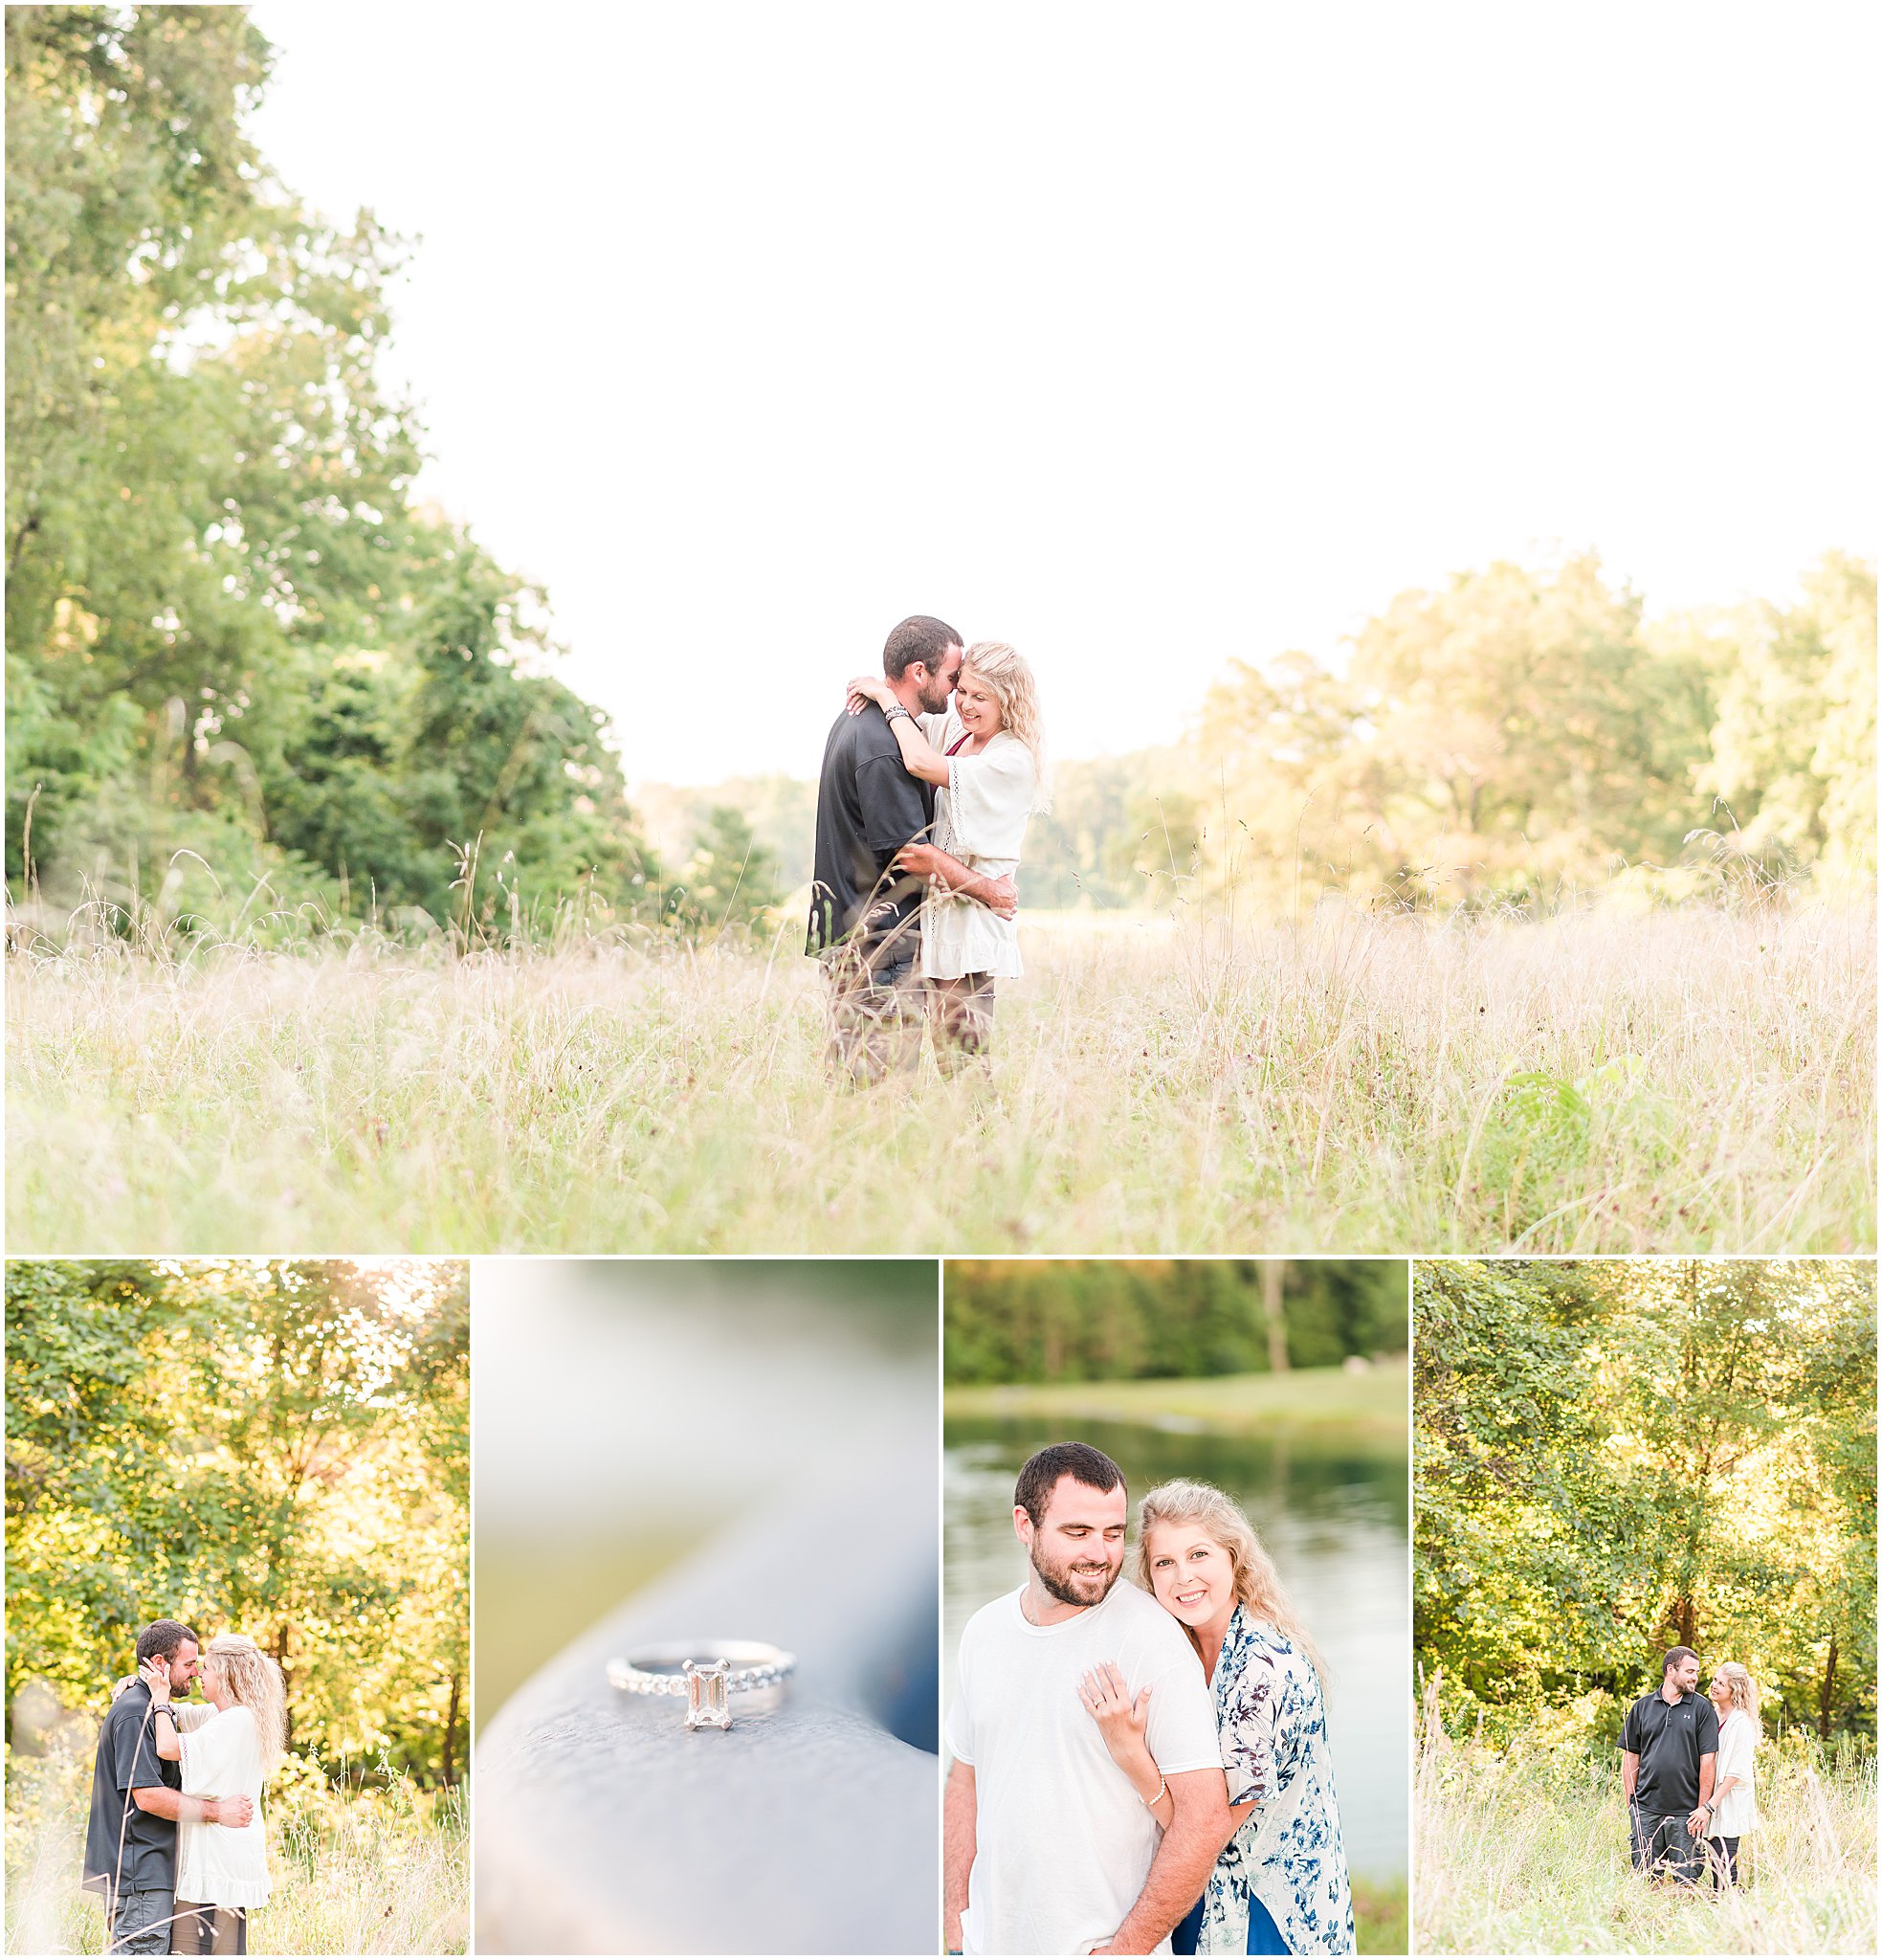 Bloomfield Indiana Engagement Session Guy and Girl standing chest to chest in field